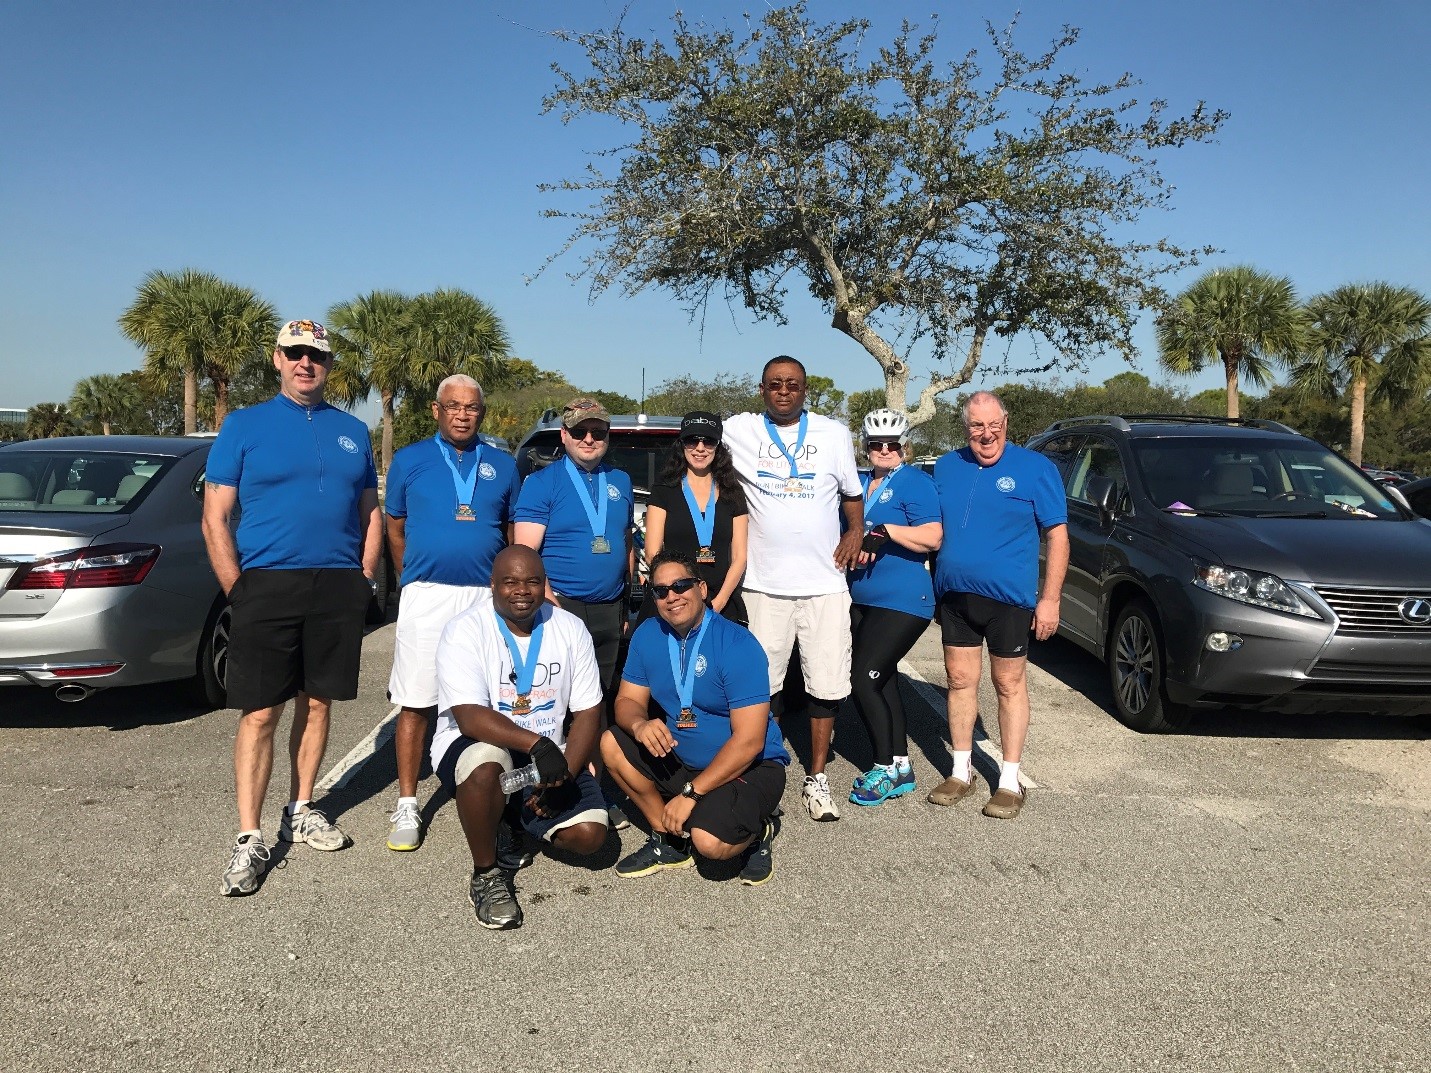 Keiser University Sponsors and Participates in Loop the Lake Event